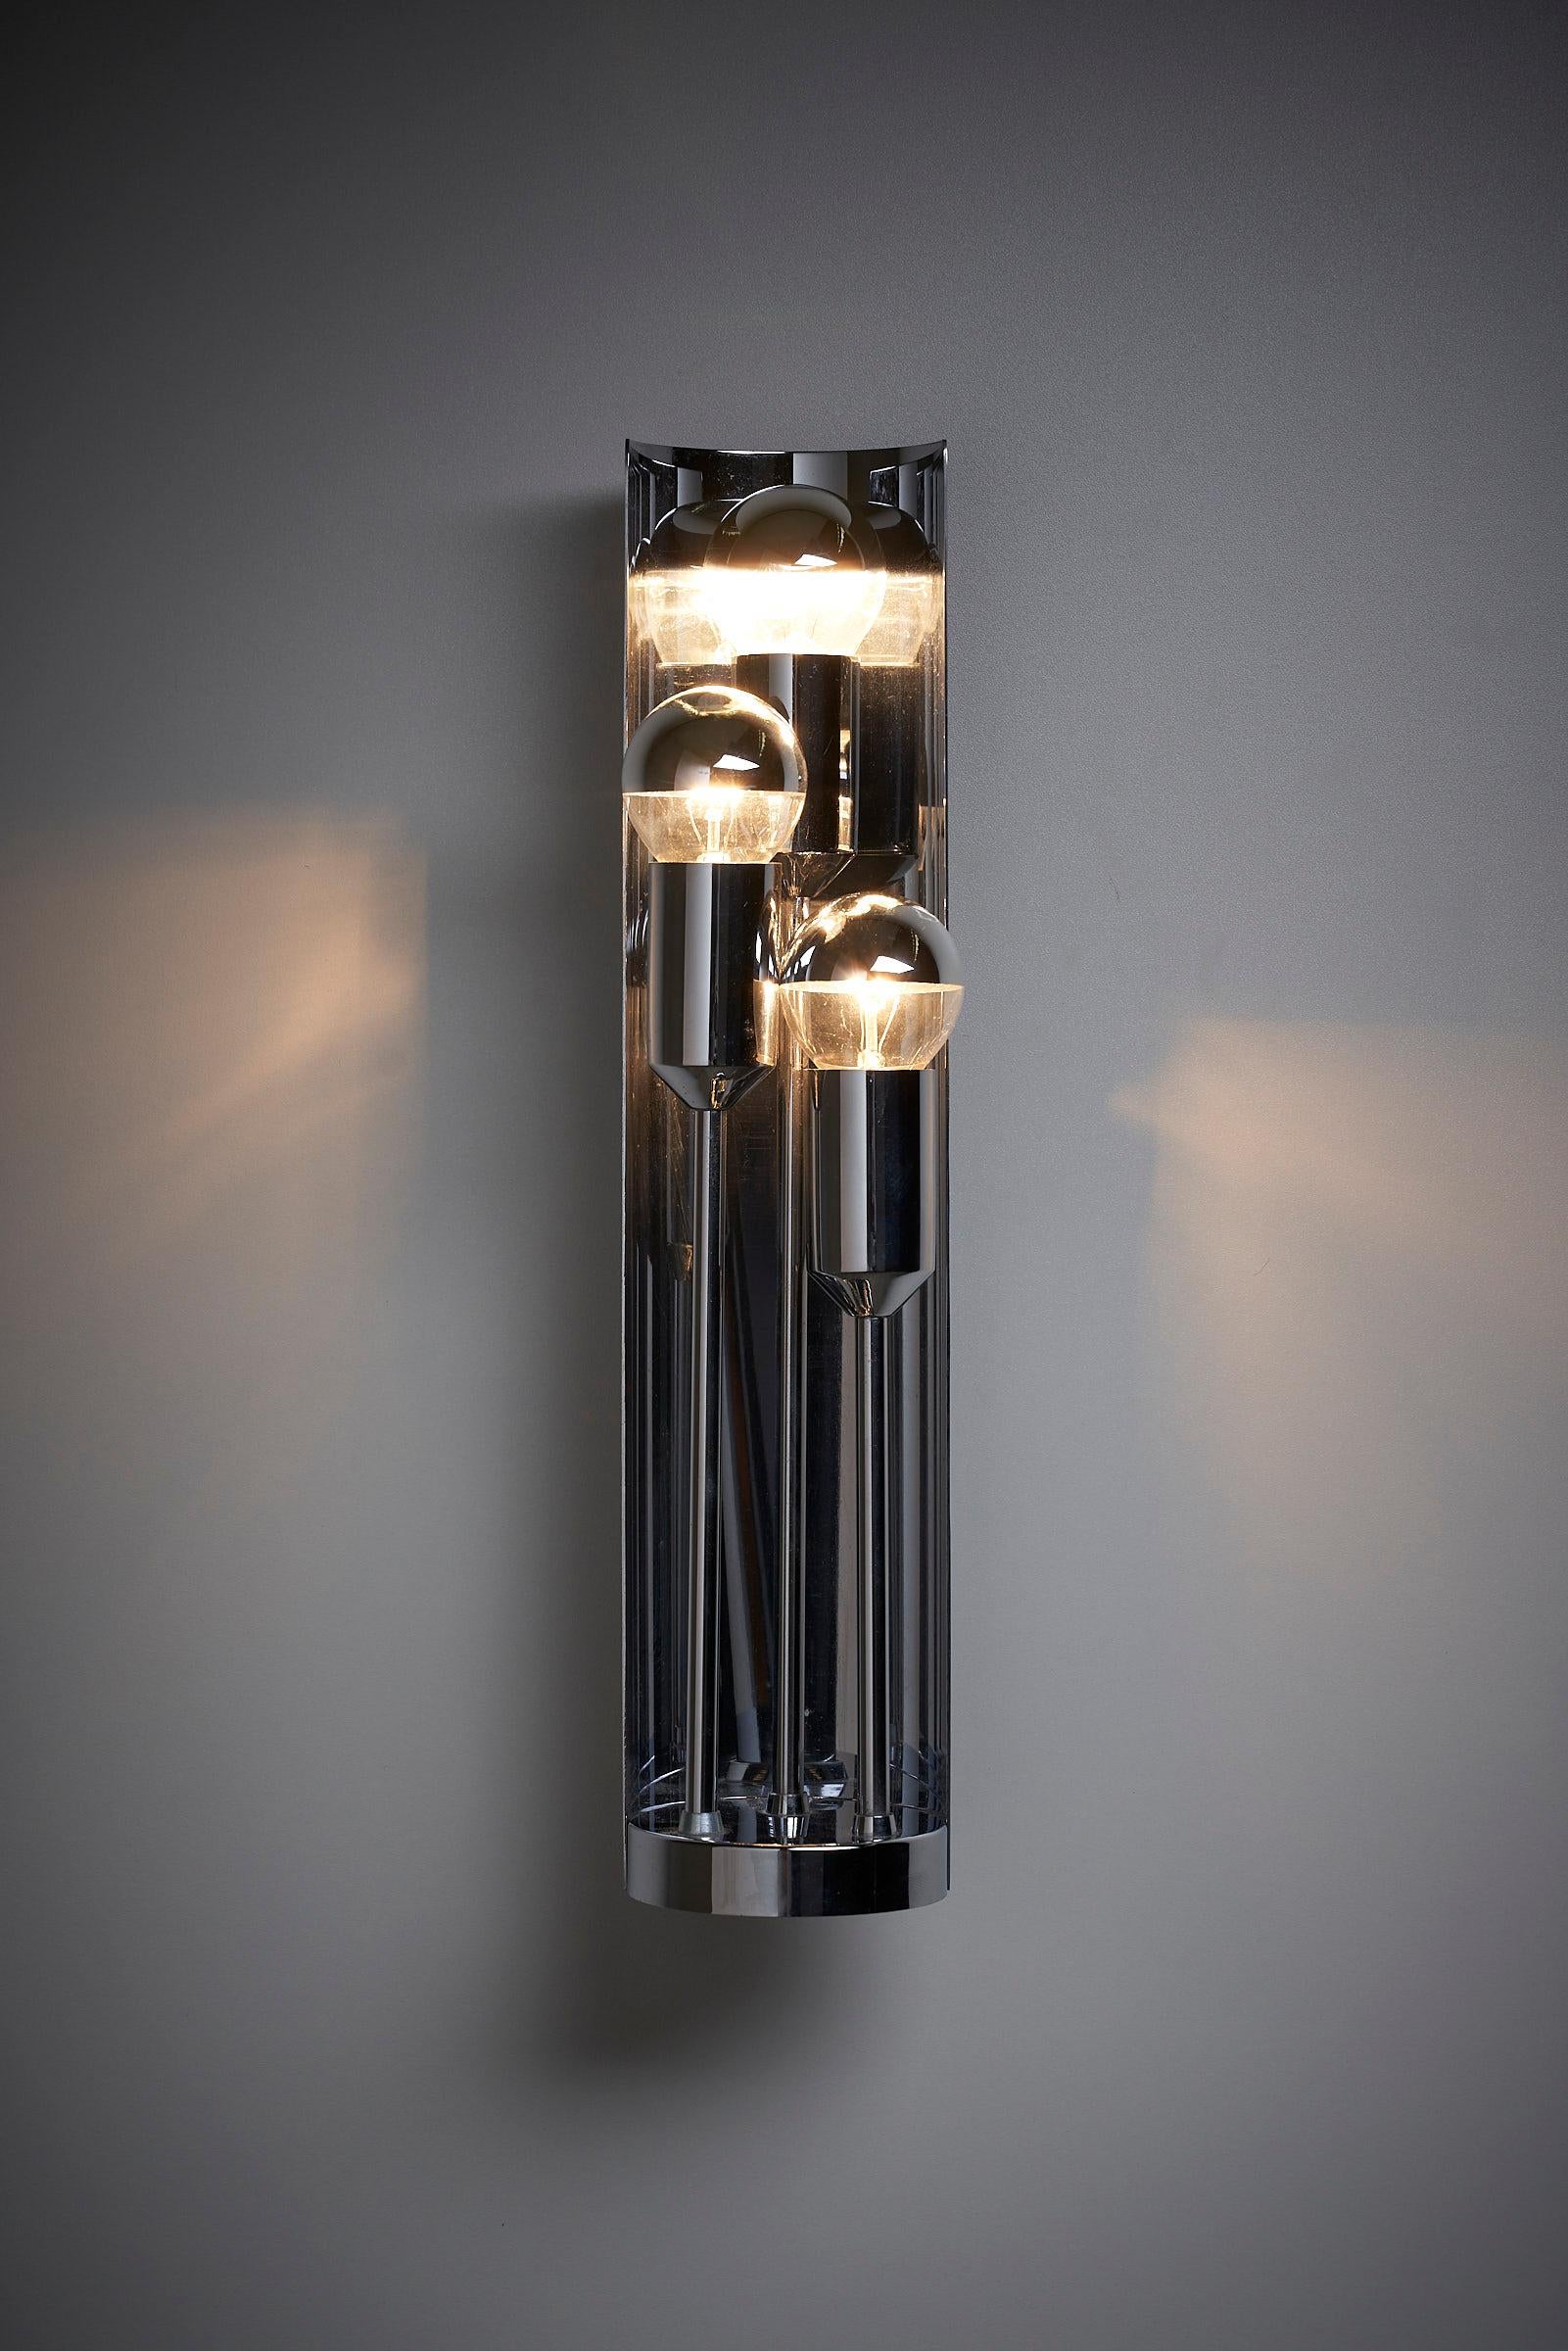 Introducing the Space Age Wall Lamp with Reflector, a remarkable creation by Cosack that exudes futuristic charm. This fully chrome lamp features sleek lines and a captivating design that is sure to make a statement in any space.

The focal point of